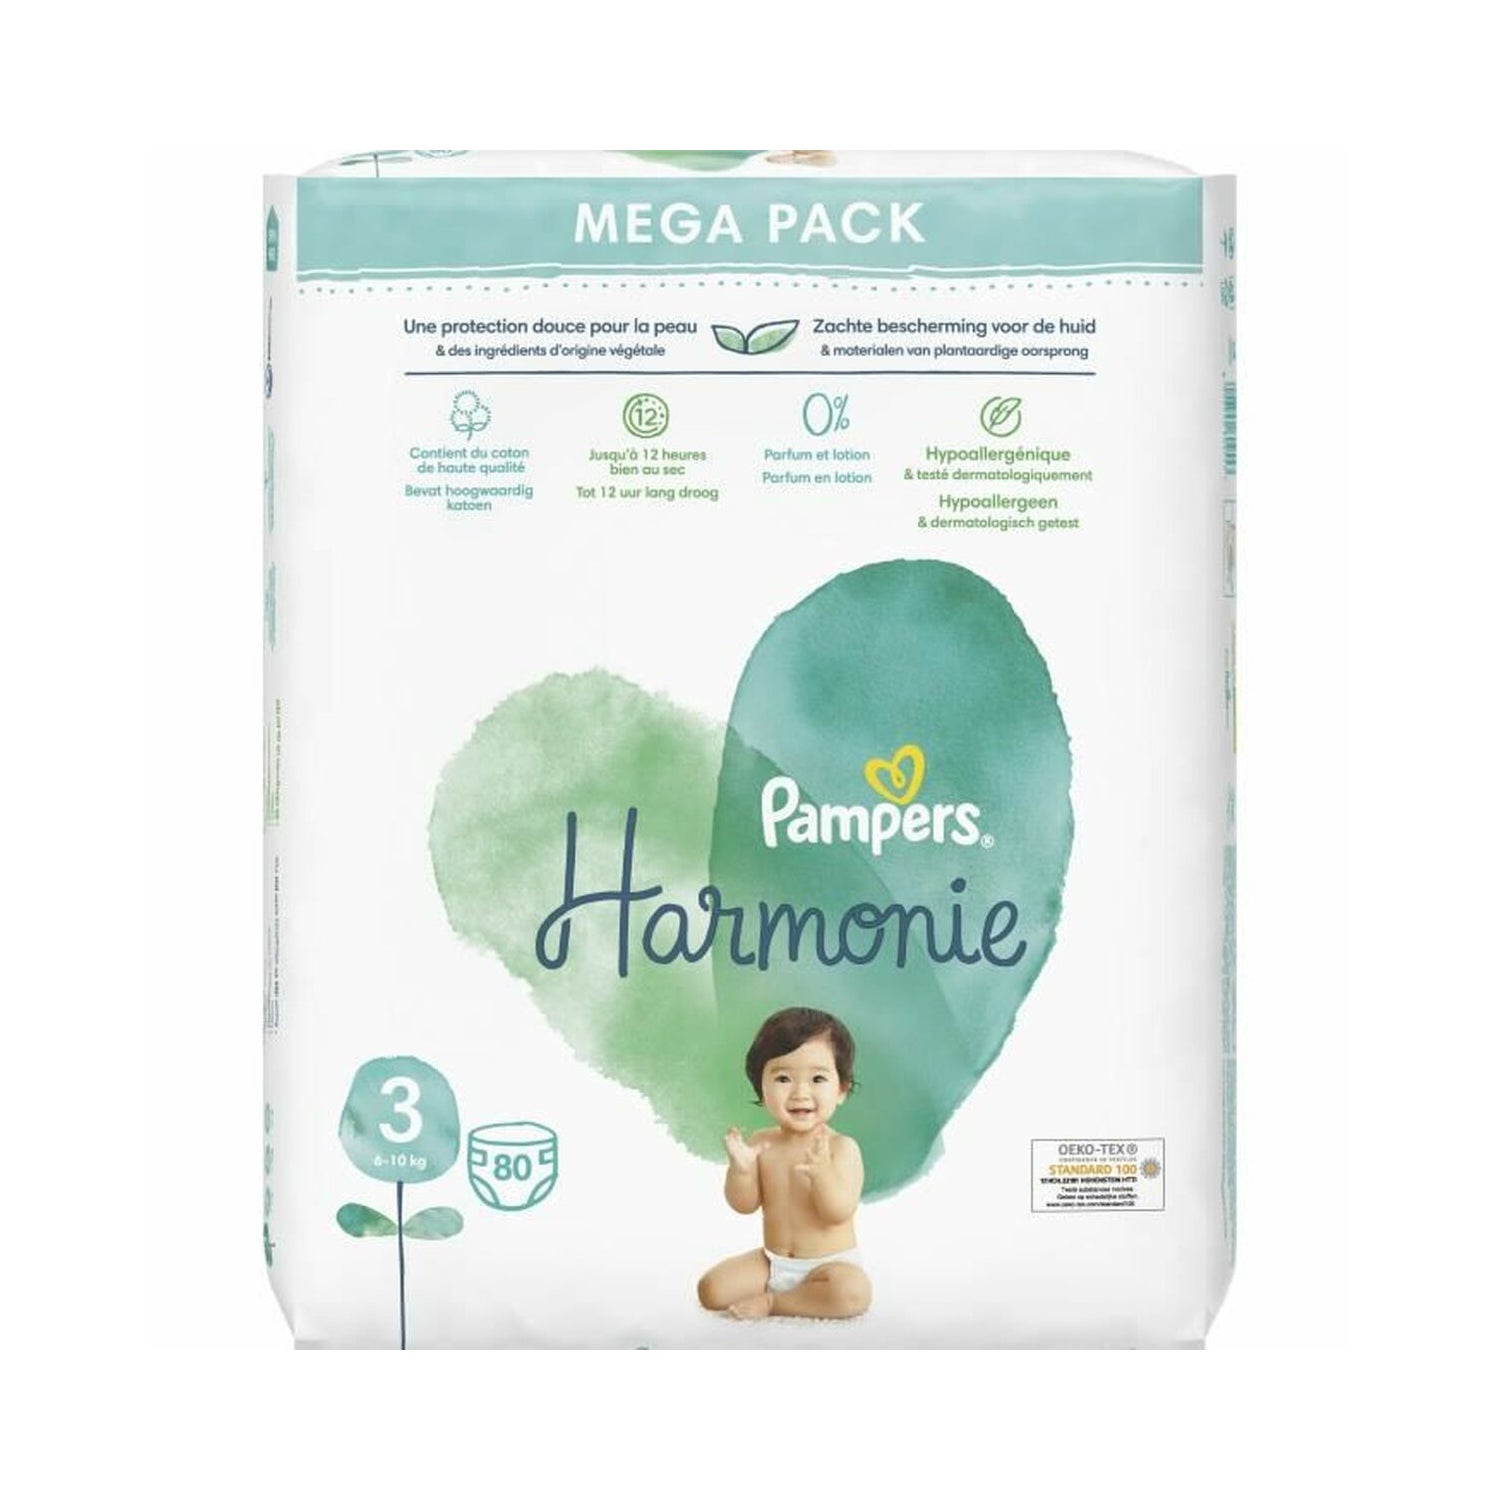 Pampers Harmonie Couches T5 (11-16kg) - 24 couches